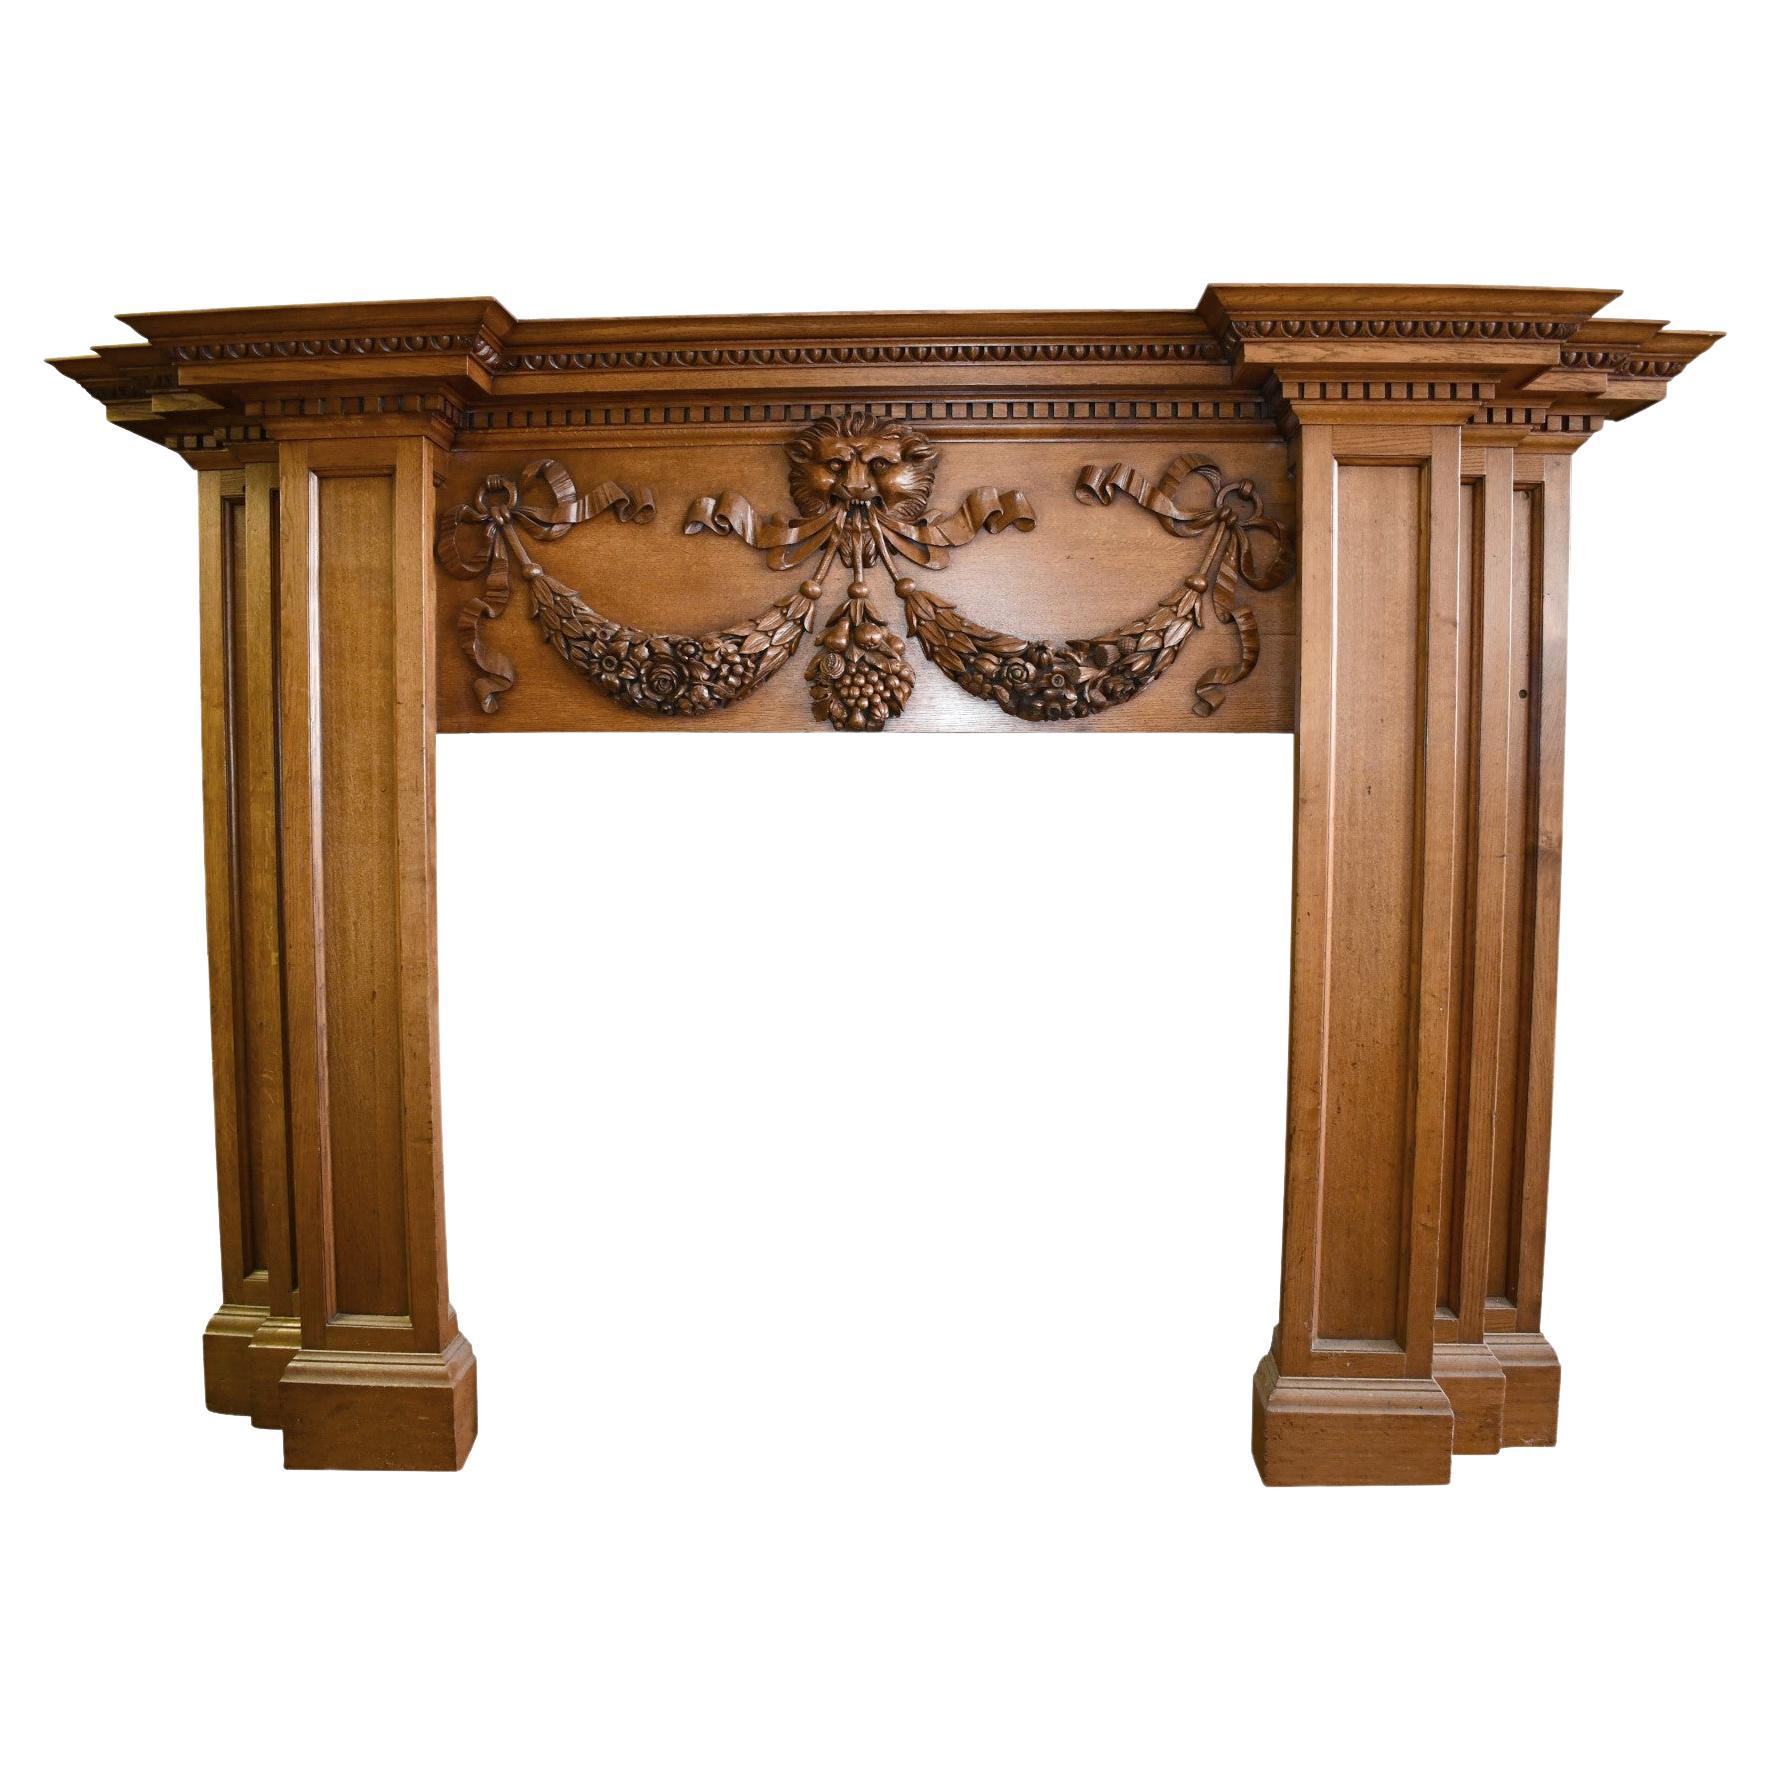 1800s English Regency Style Carved Oak Tall Mantel with Lion, Ribbon and Swags For Sale